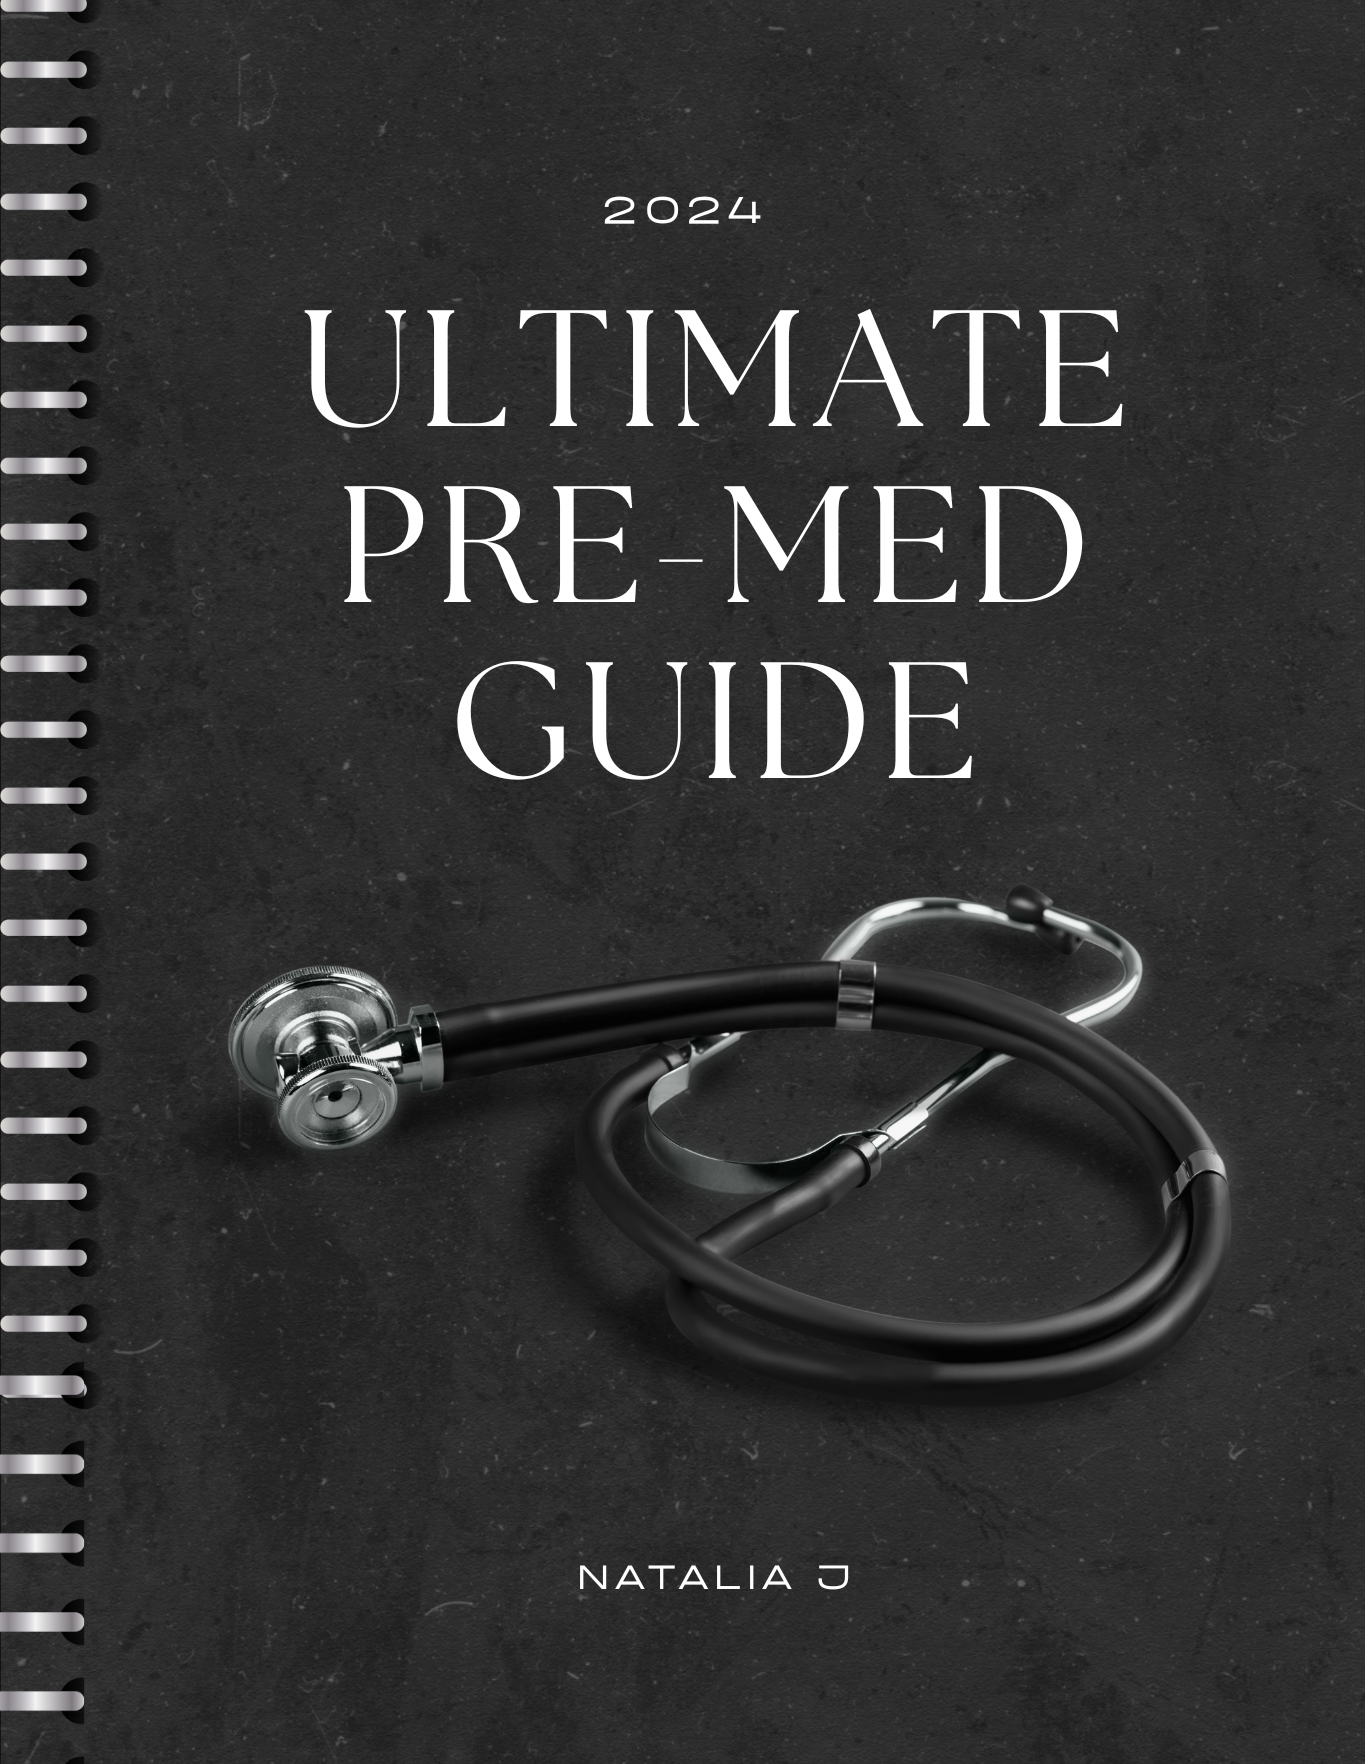 The Ultimate Pre-Med Guide